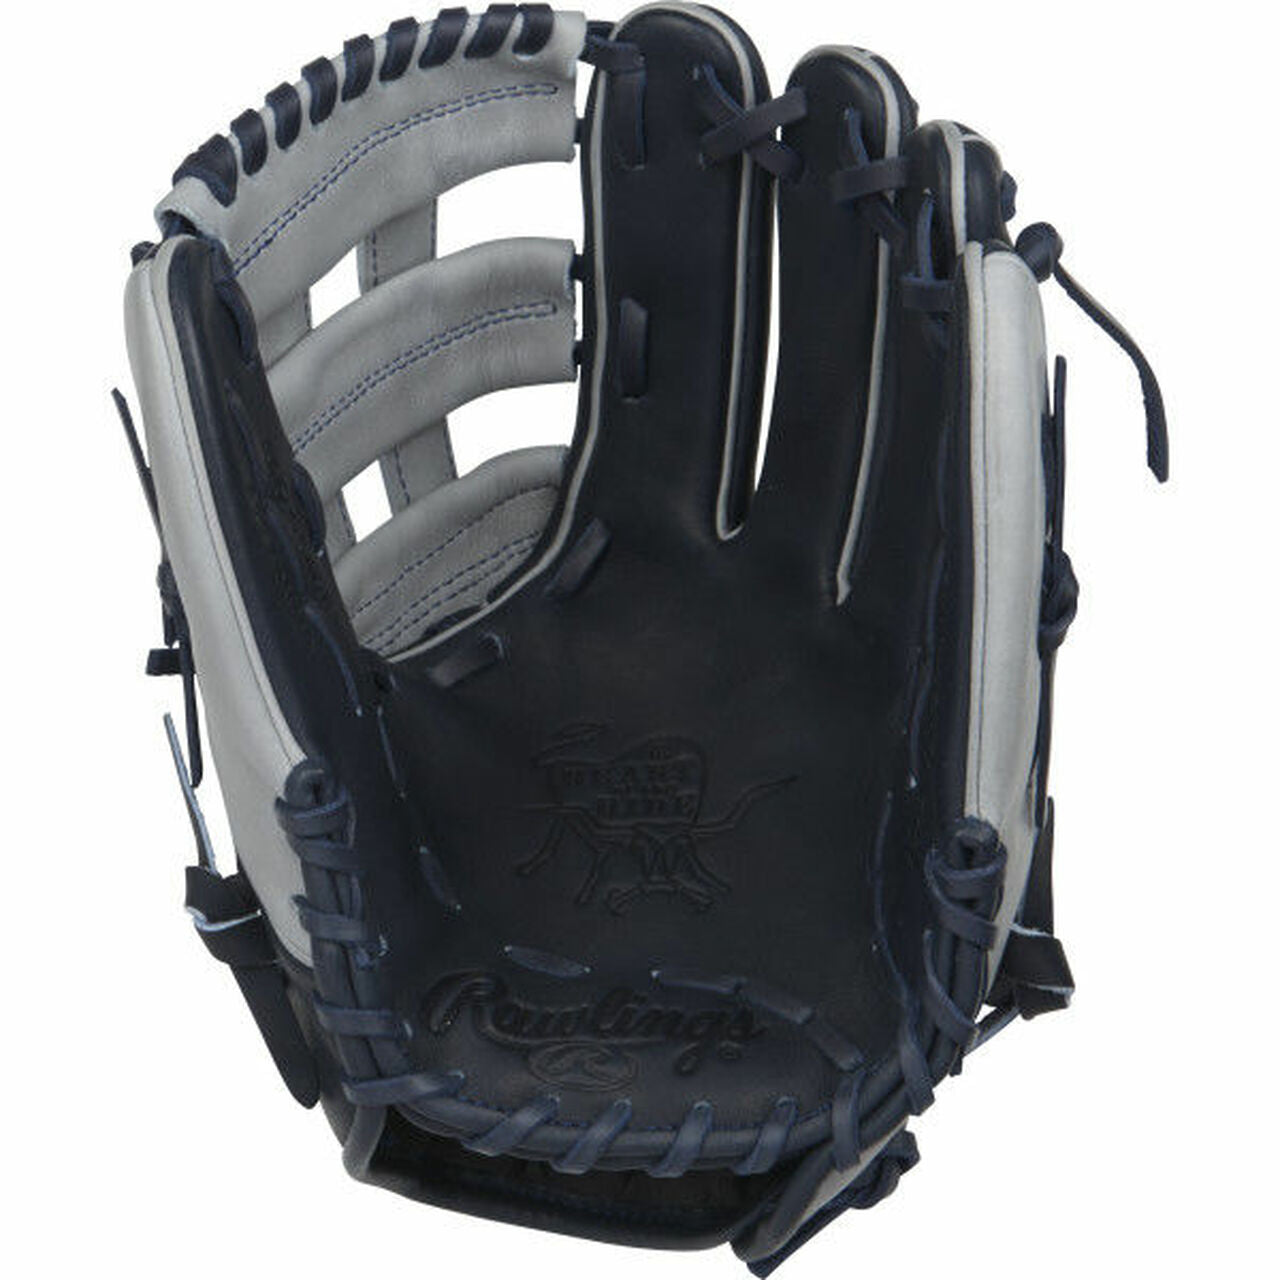 Rawlings Baseball Glove Color Sync All Positions 11.75in